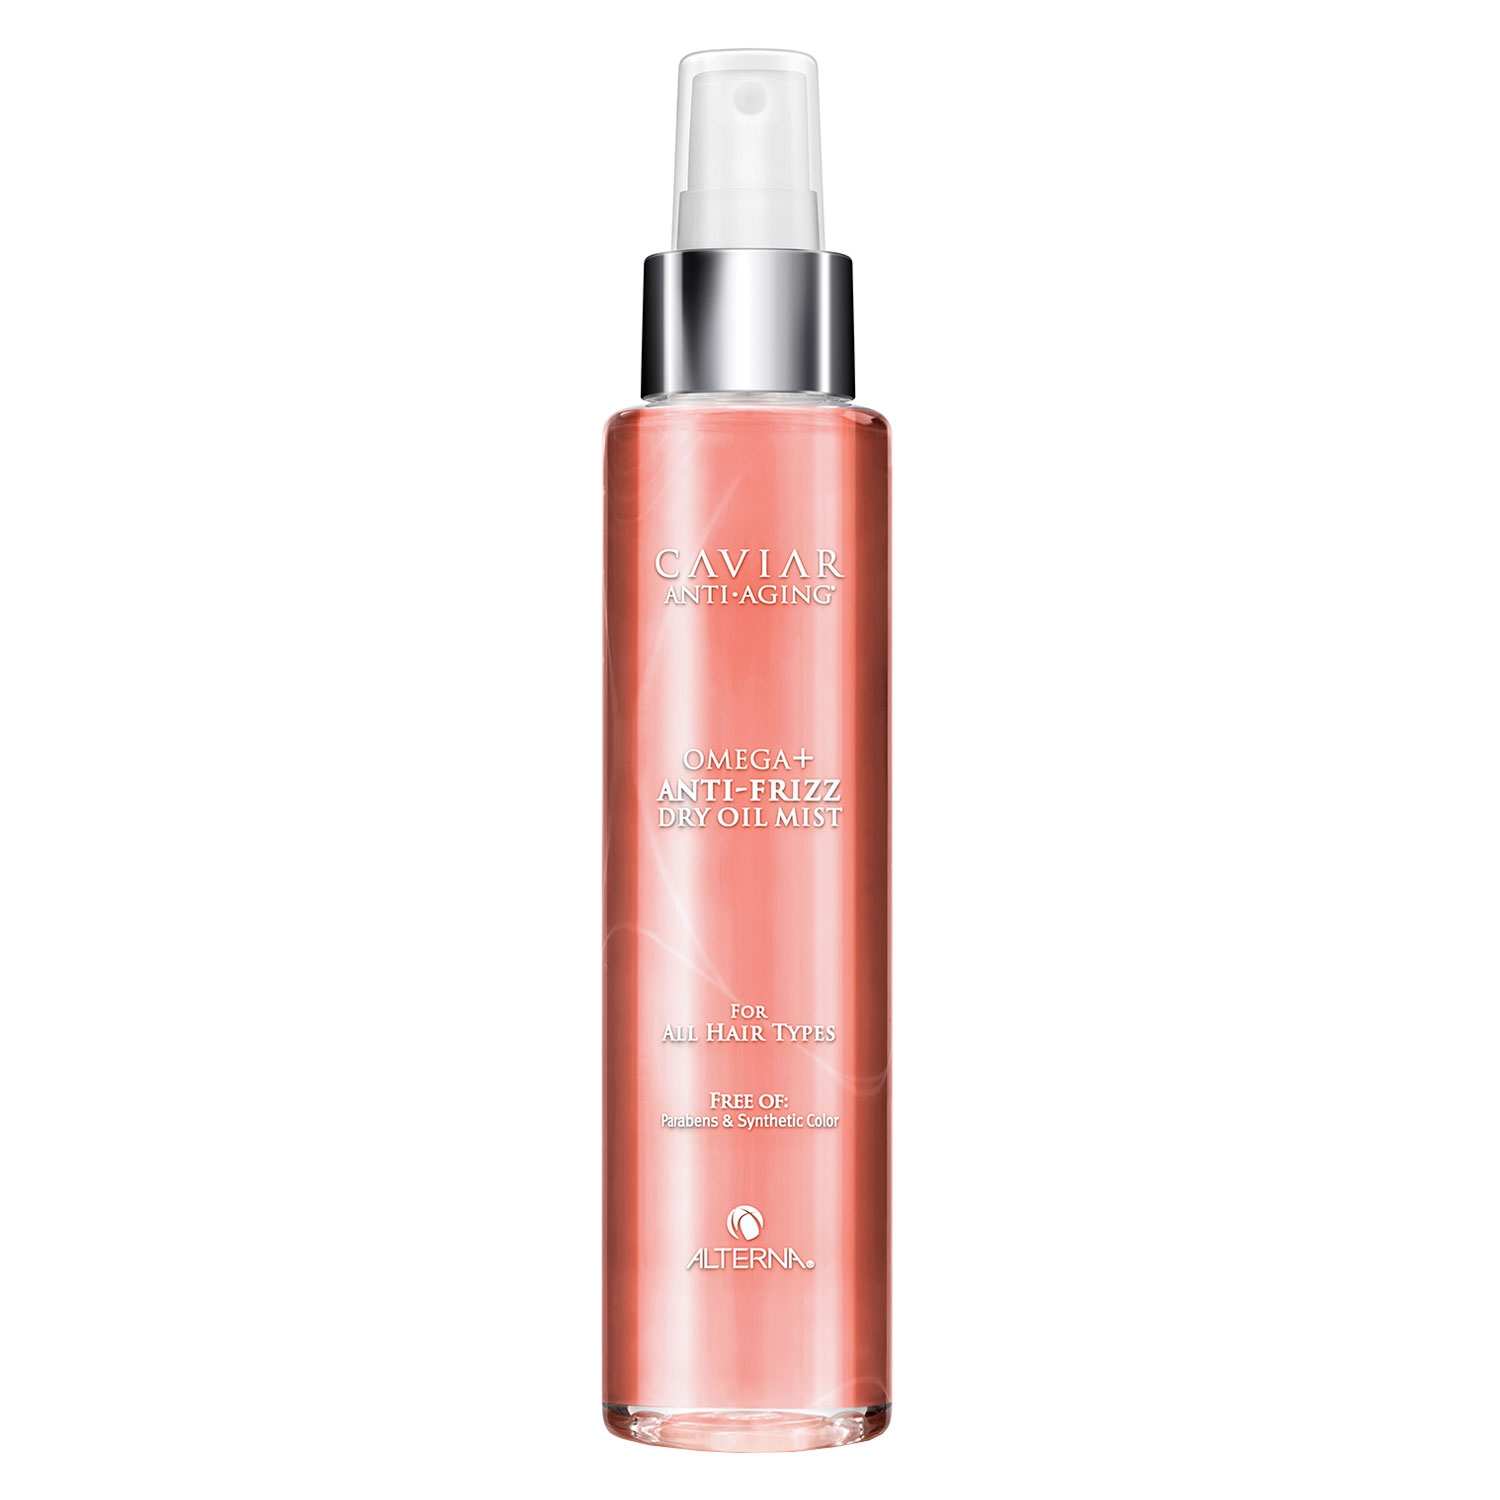 Product image from Caviar Anti-Frizz - Dry Oil Mist